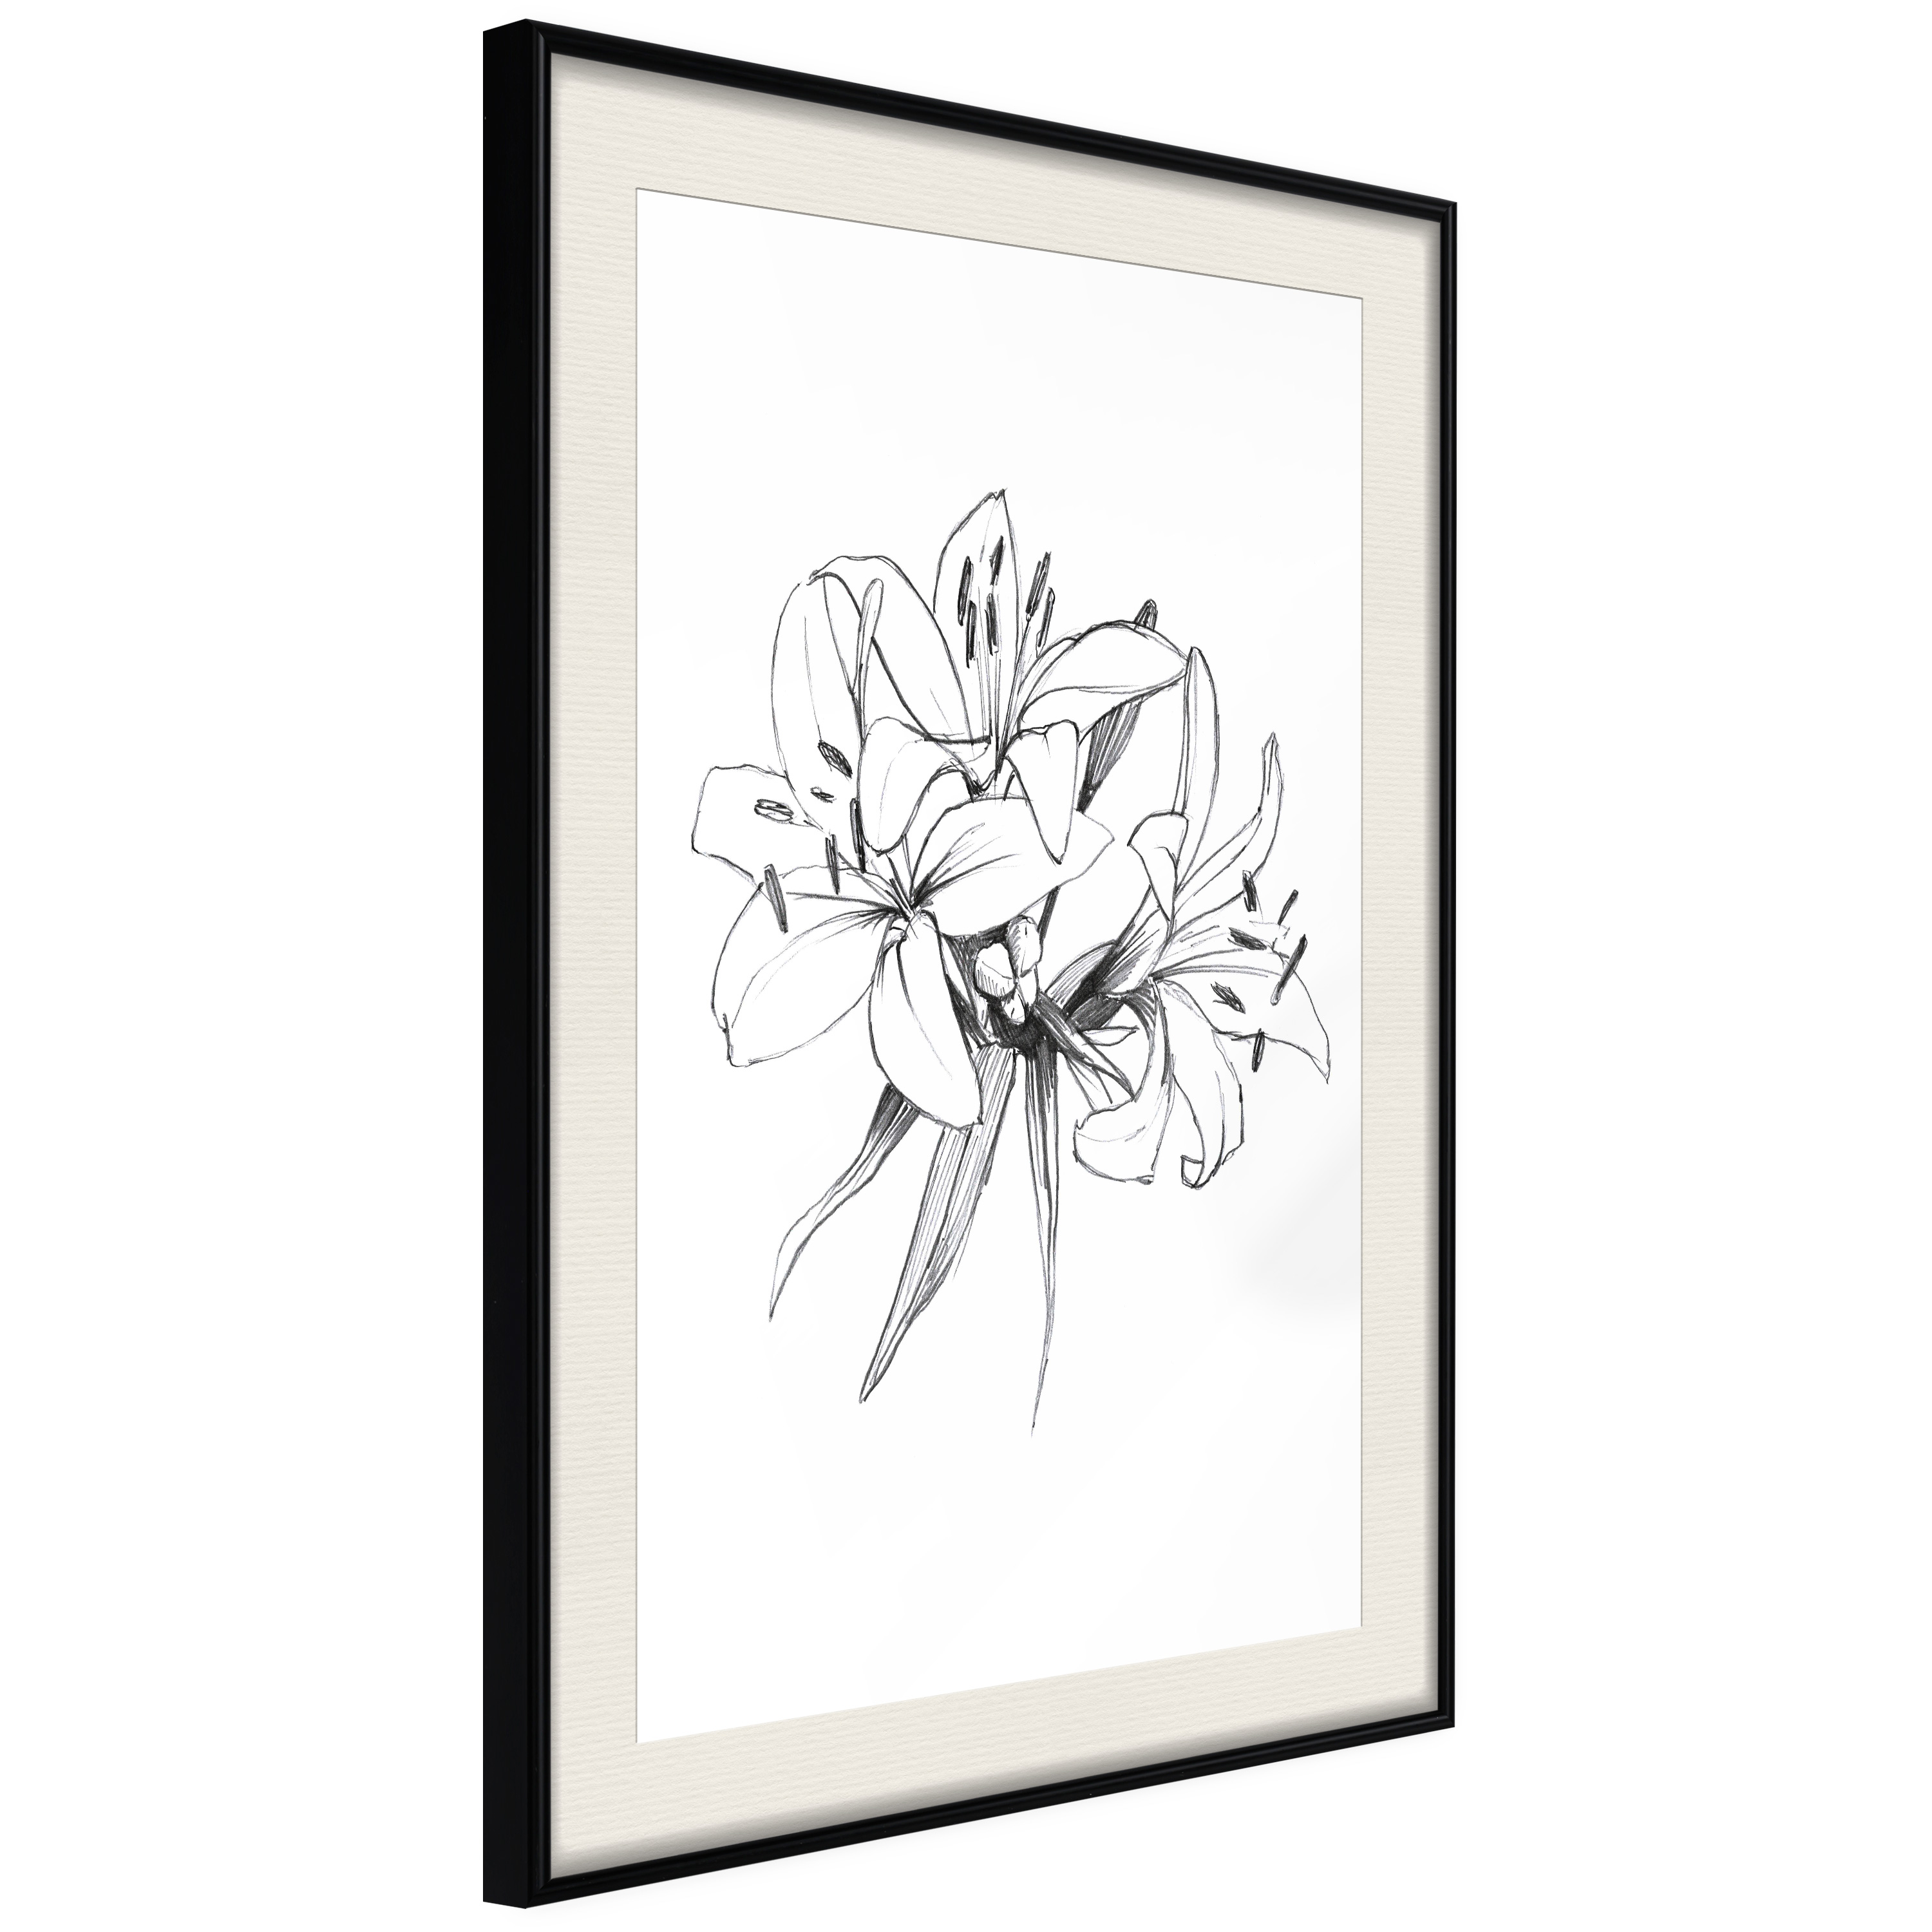 Poster - Sketch of Lillies - 40x60